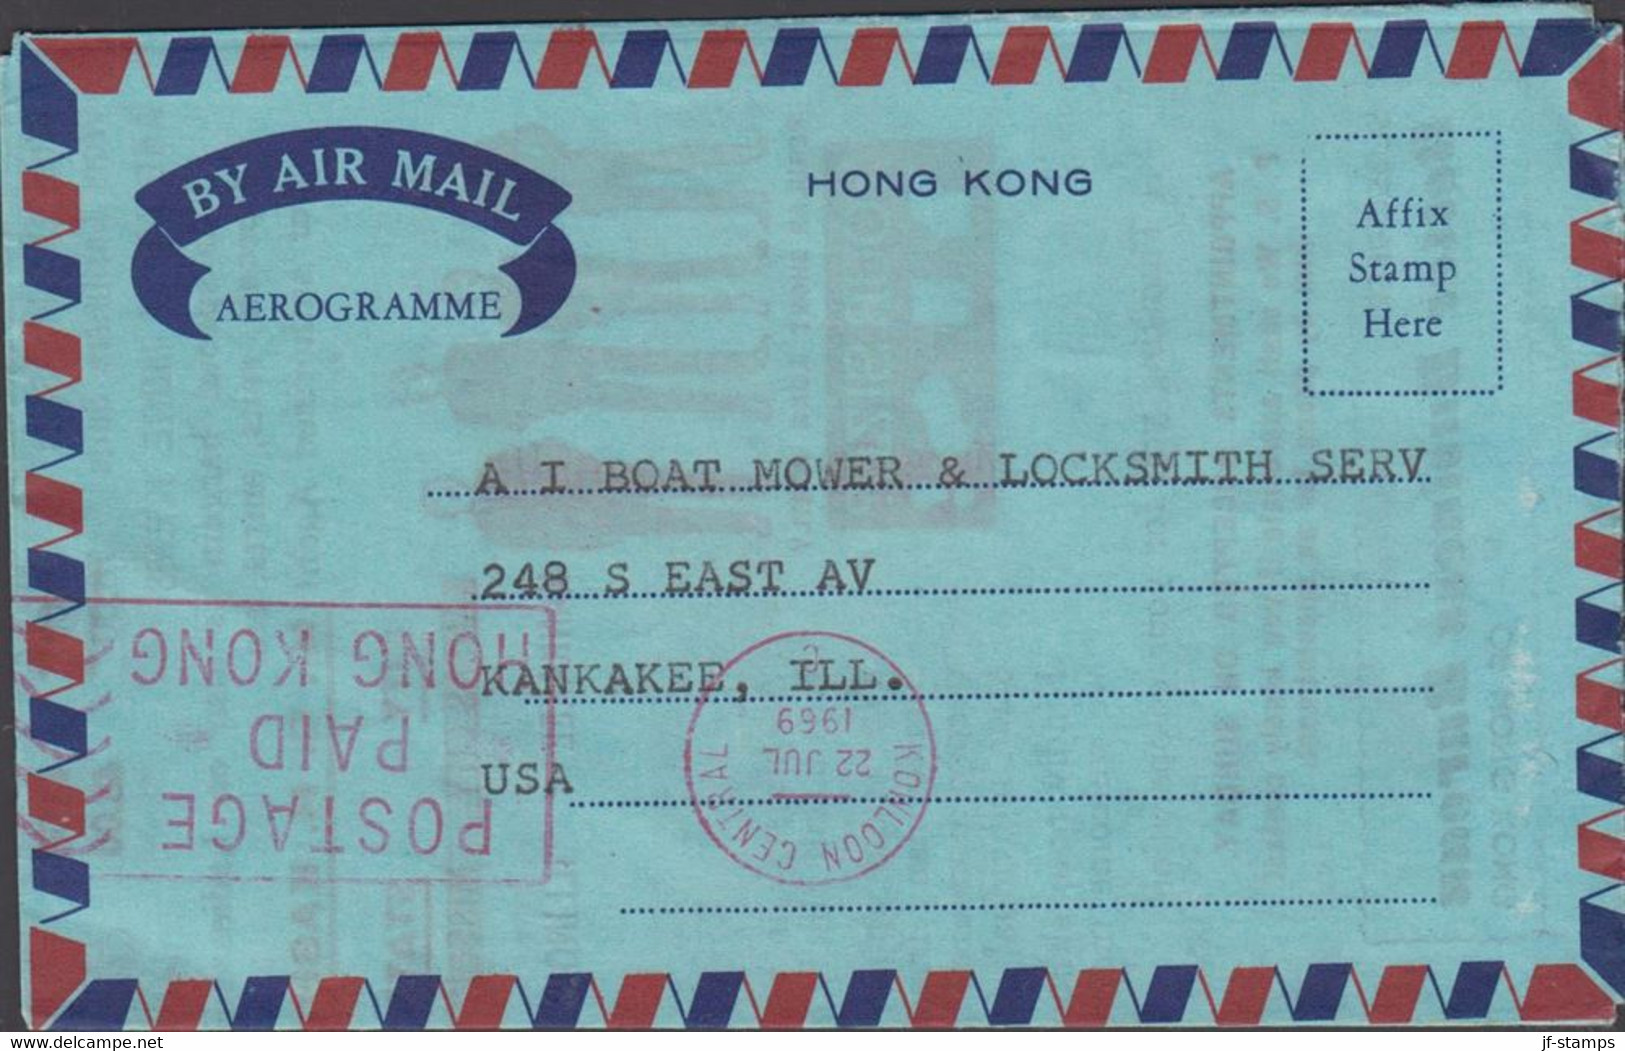 1969. HONG KONG. AEROGRAMME With Red Cancel KOWLOON CENTRAL SS JUL 1969 POSTAGE PAID HONG KONG. Inside Adv... - JF427153 - Enteros Postales